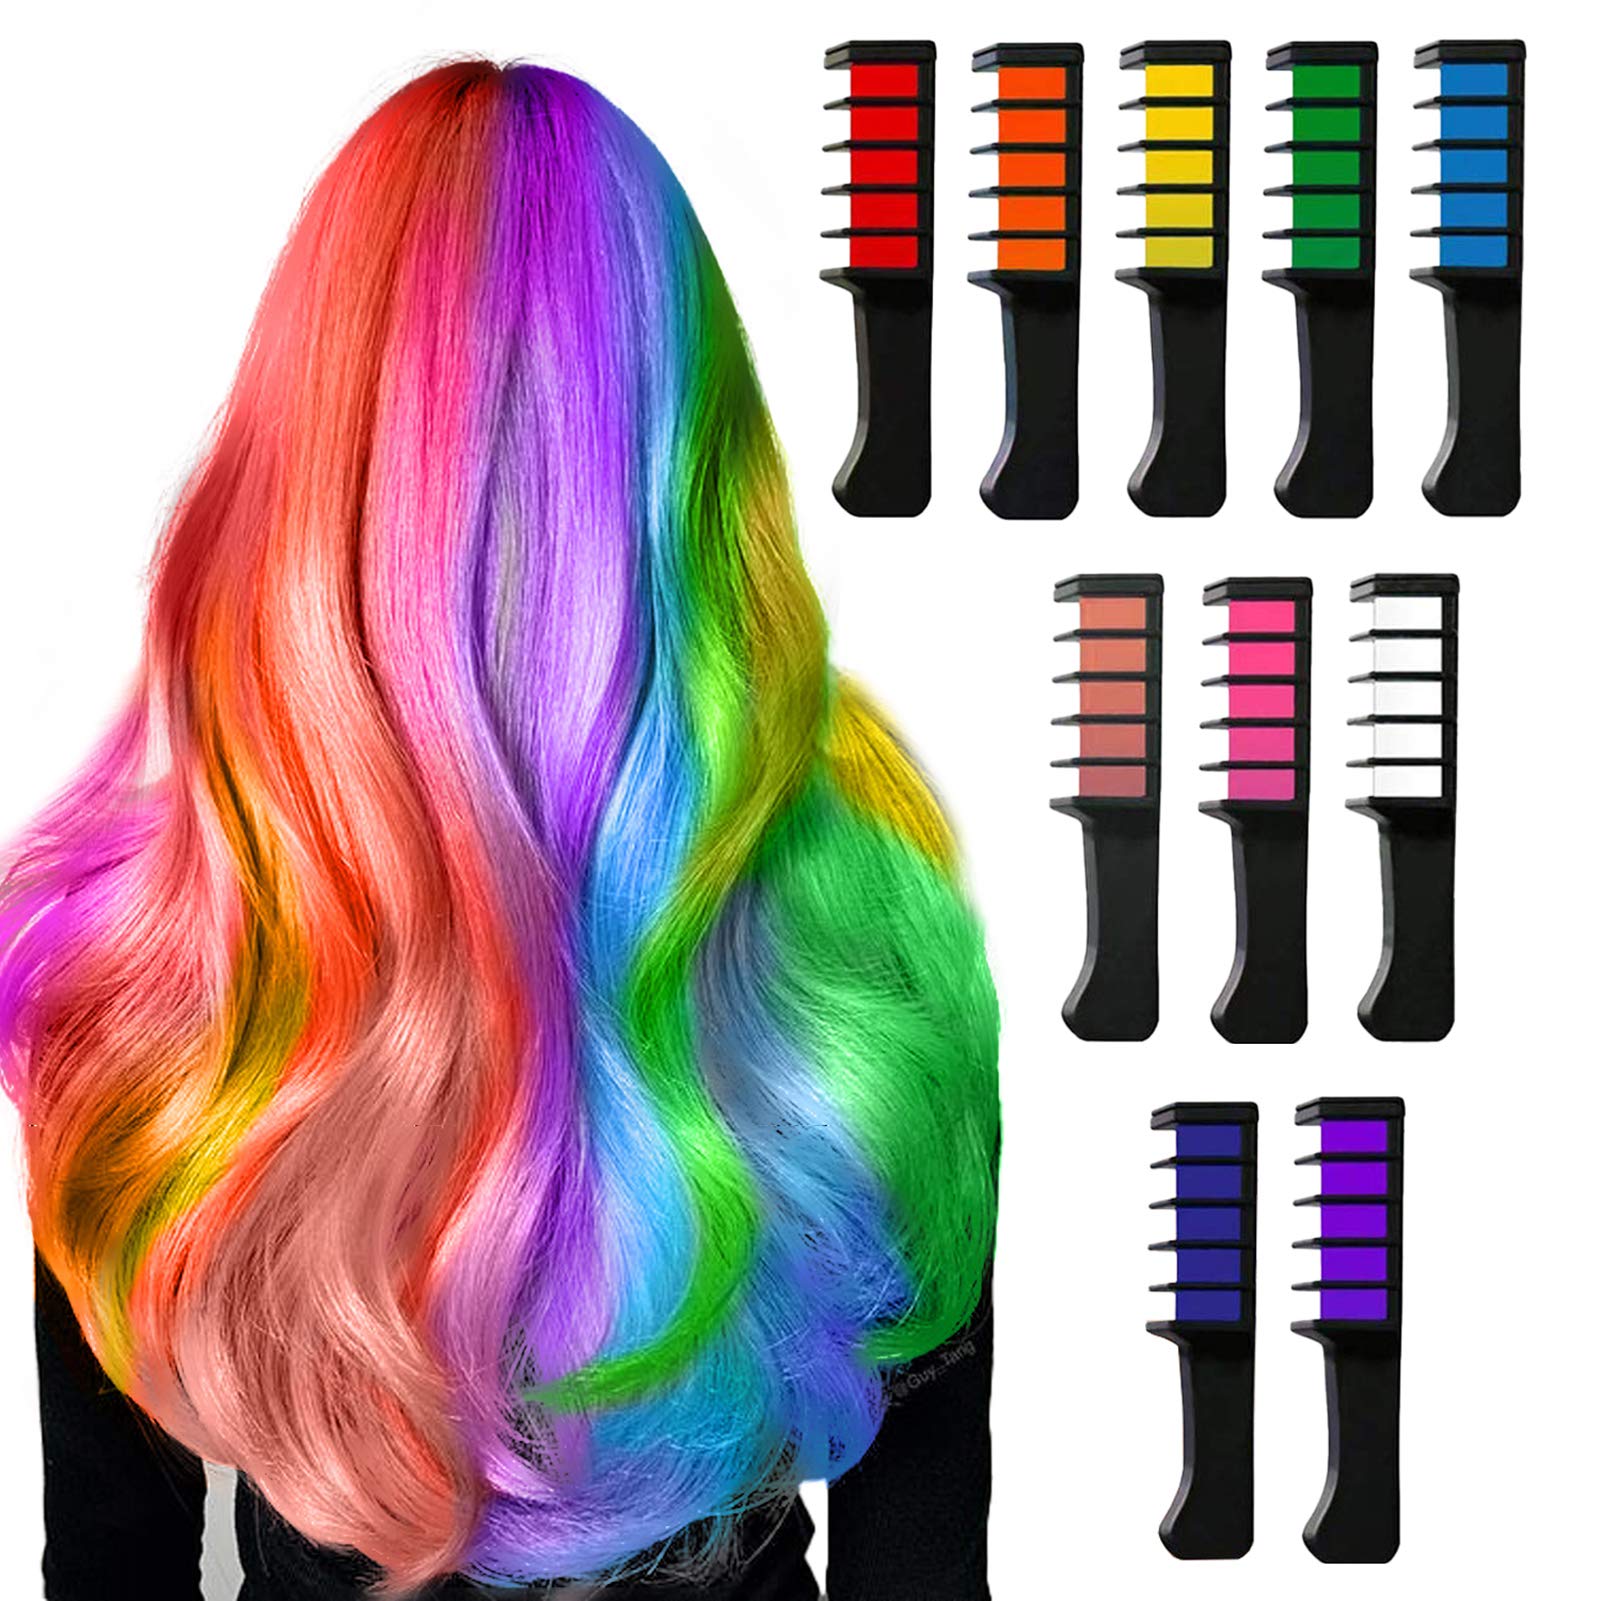 Auriviz Hair Chalk for Girls Kids Temporary Bright Hair Chalk Comb  Non-Toxic Washable Hair Color Dye for Kids of Age 4 5 6 7 8 9 Christmas New  Years Cosplay Party Birthday Gifts (10 Pack)